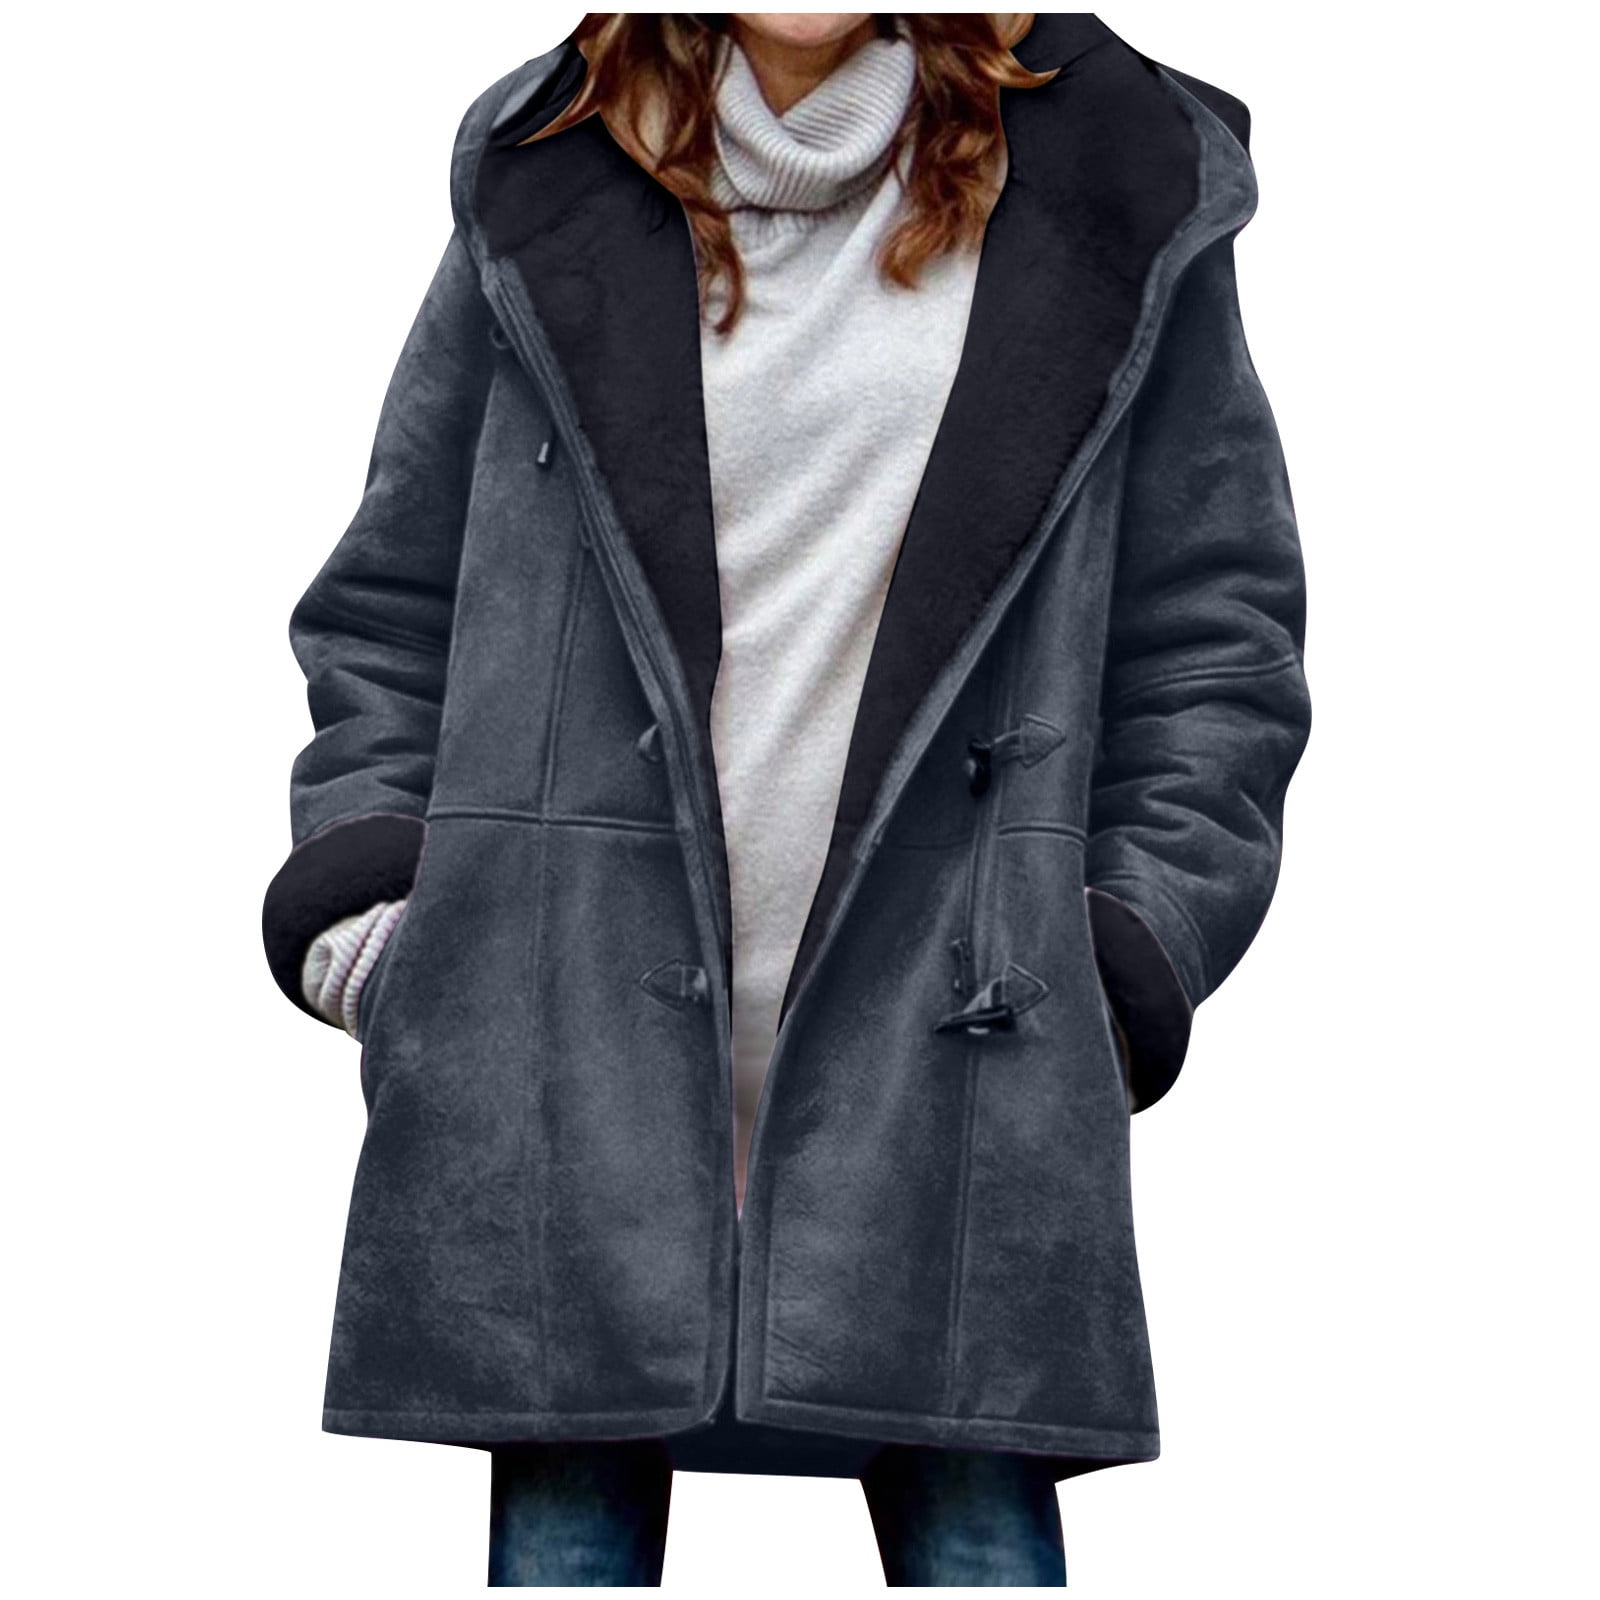 Clearance Suede Leather Jacket Womens Winter Warm Longline Coat with ...